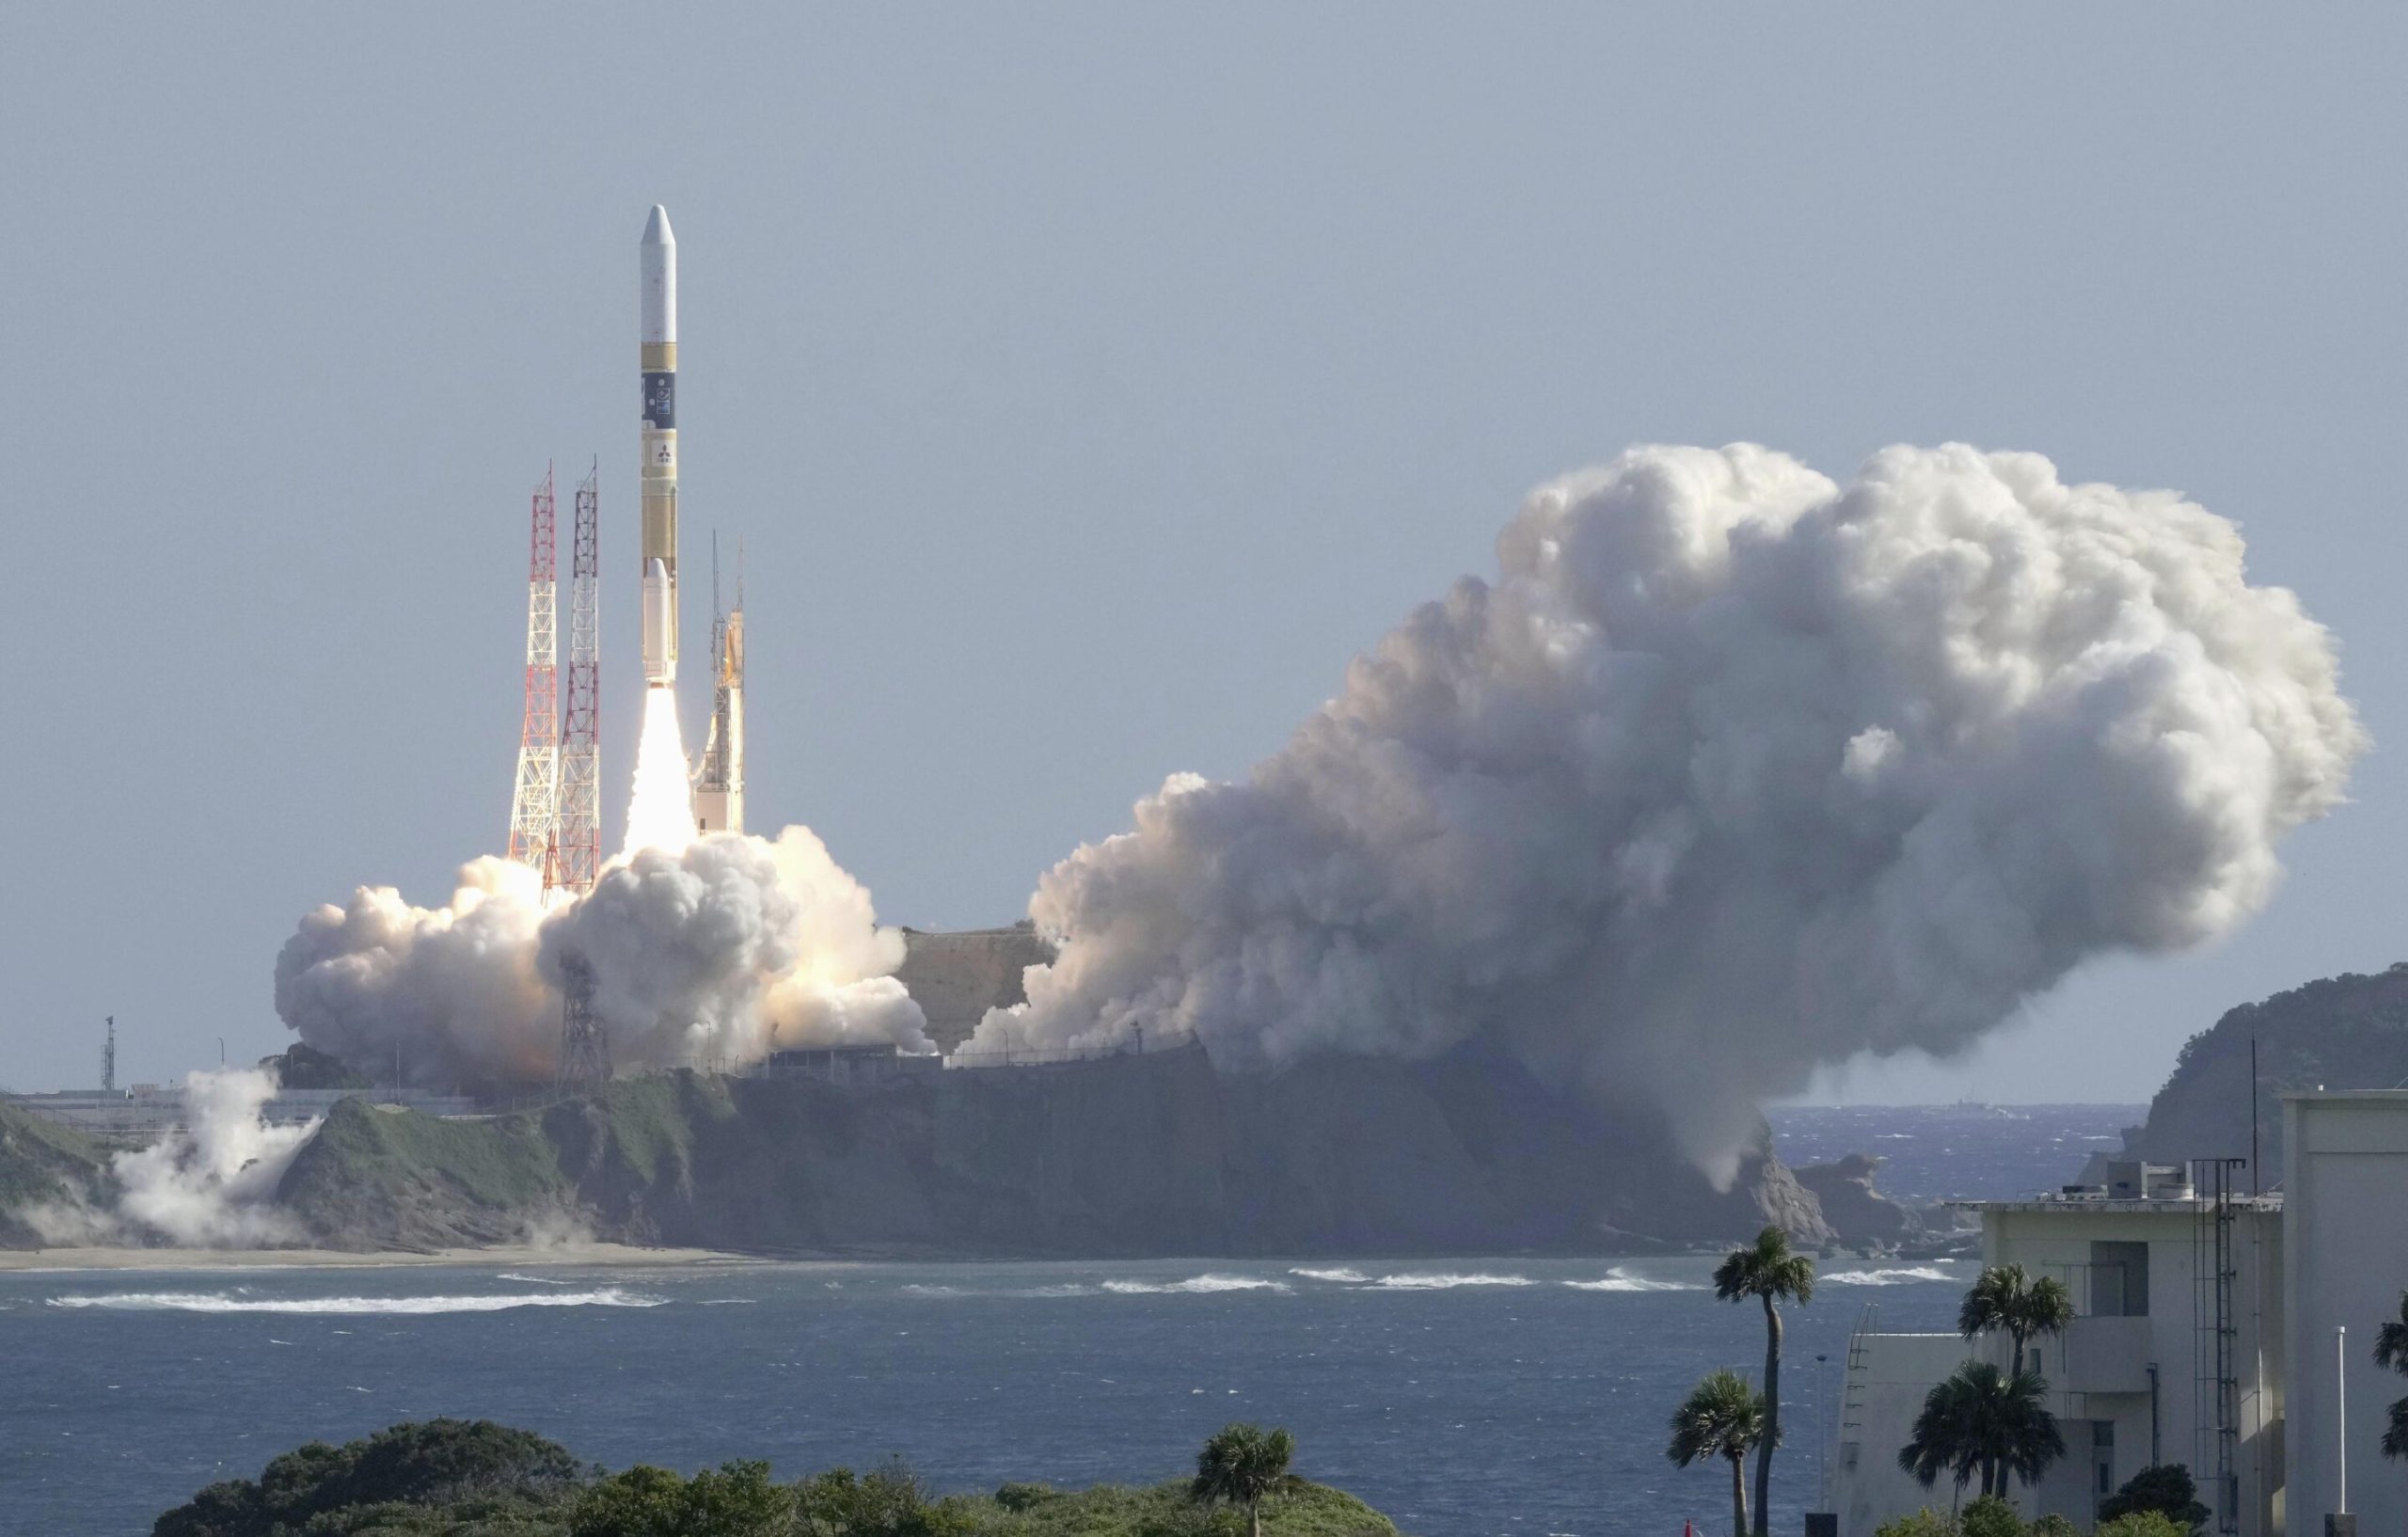 Japan Sends Rocket with Lunar Lander and X-ray Telescope Into Space. Credit-Kyodo News